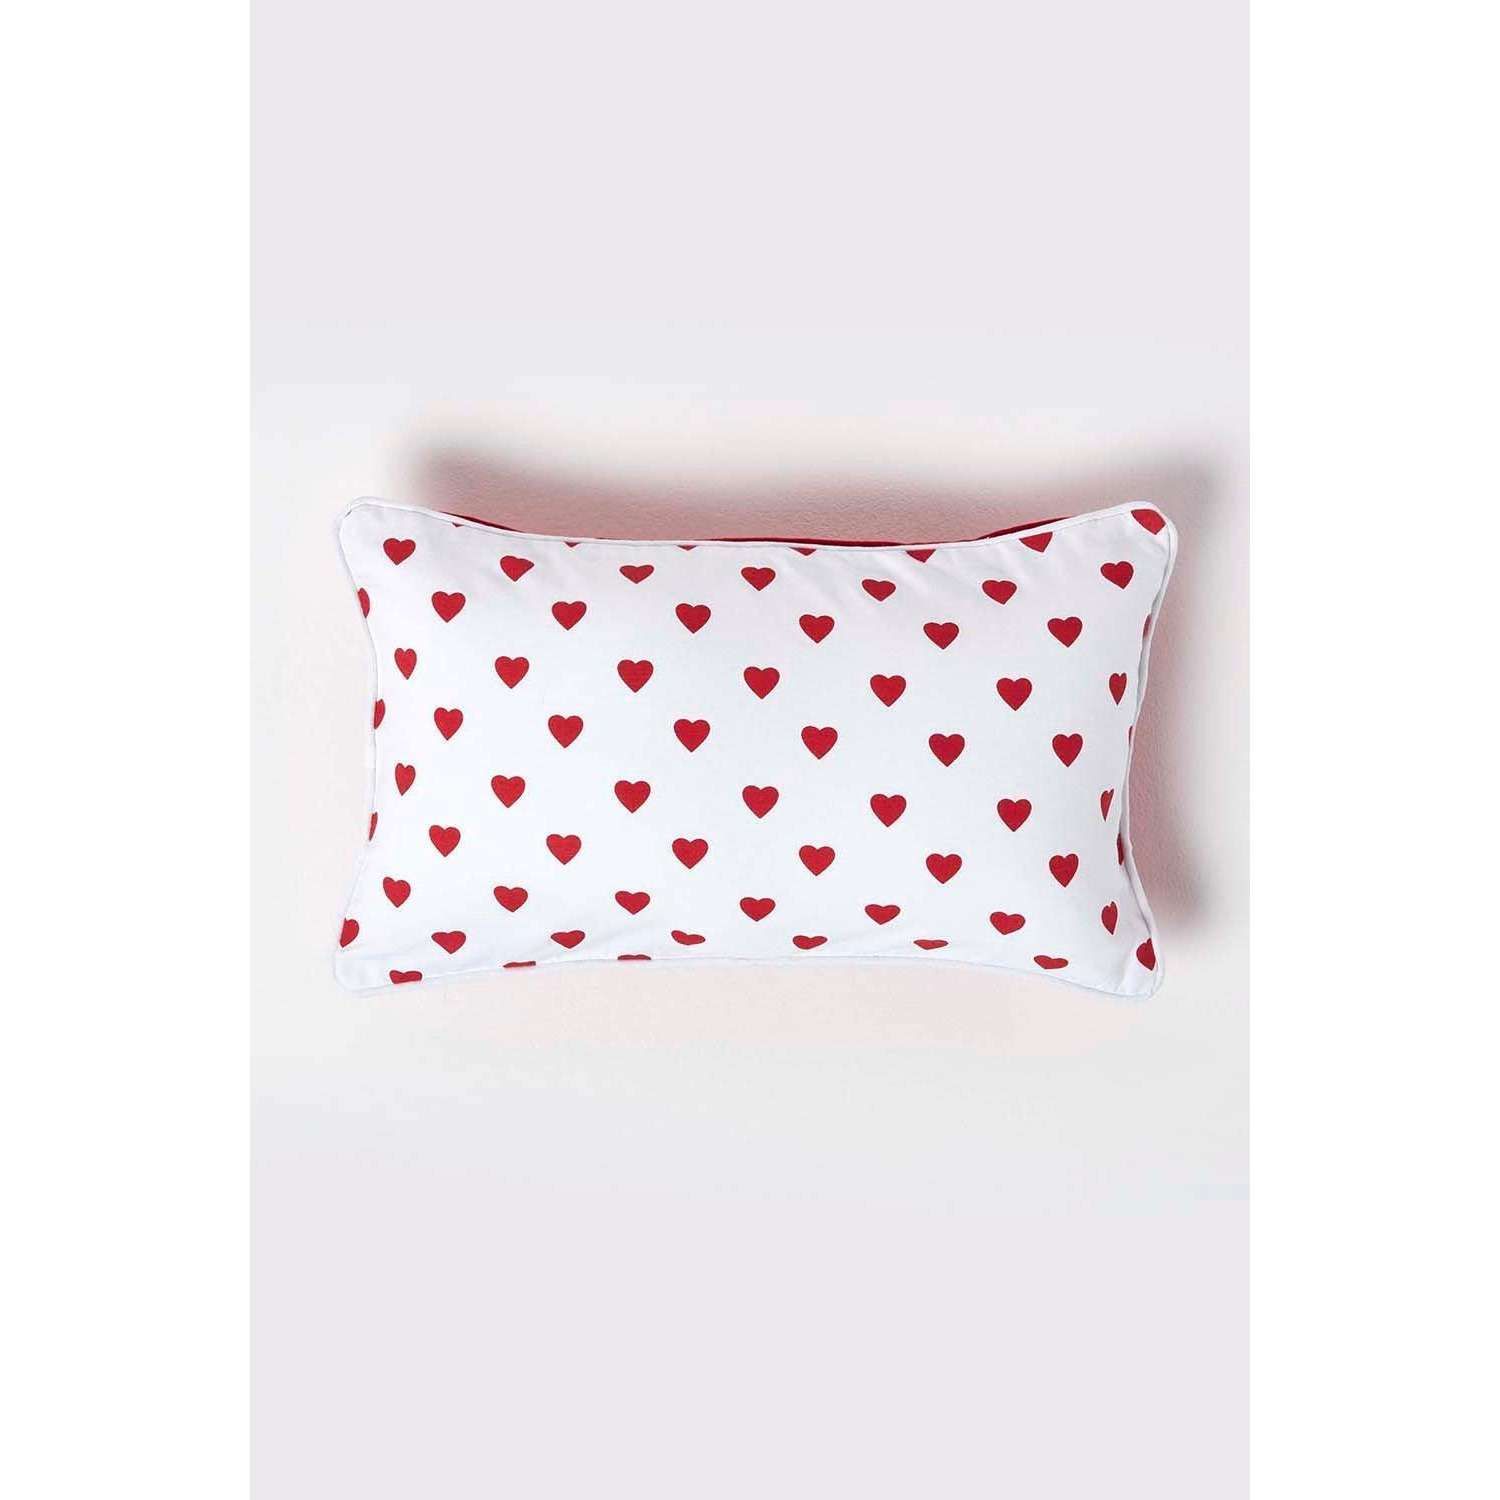 Cotton Hearts Cushion Cover - image 1